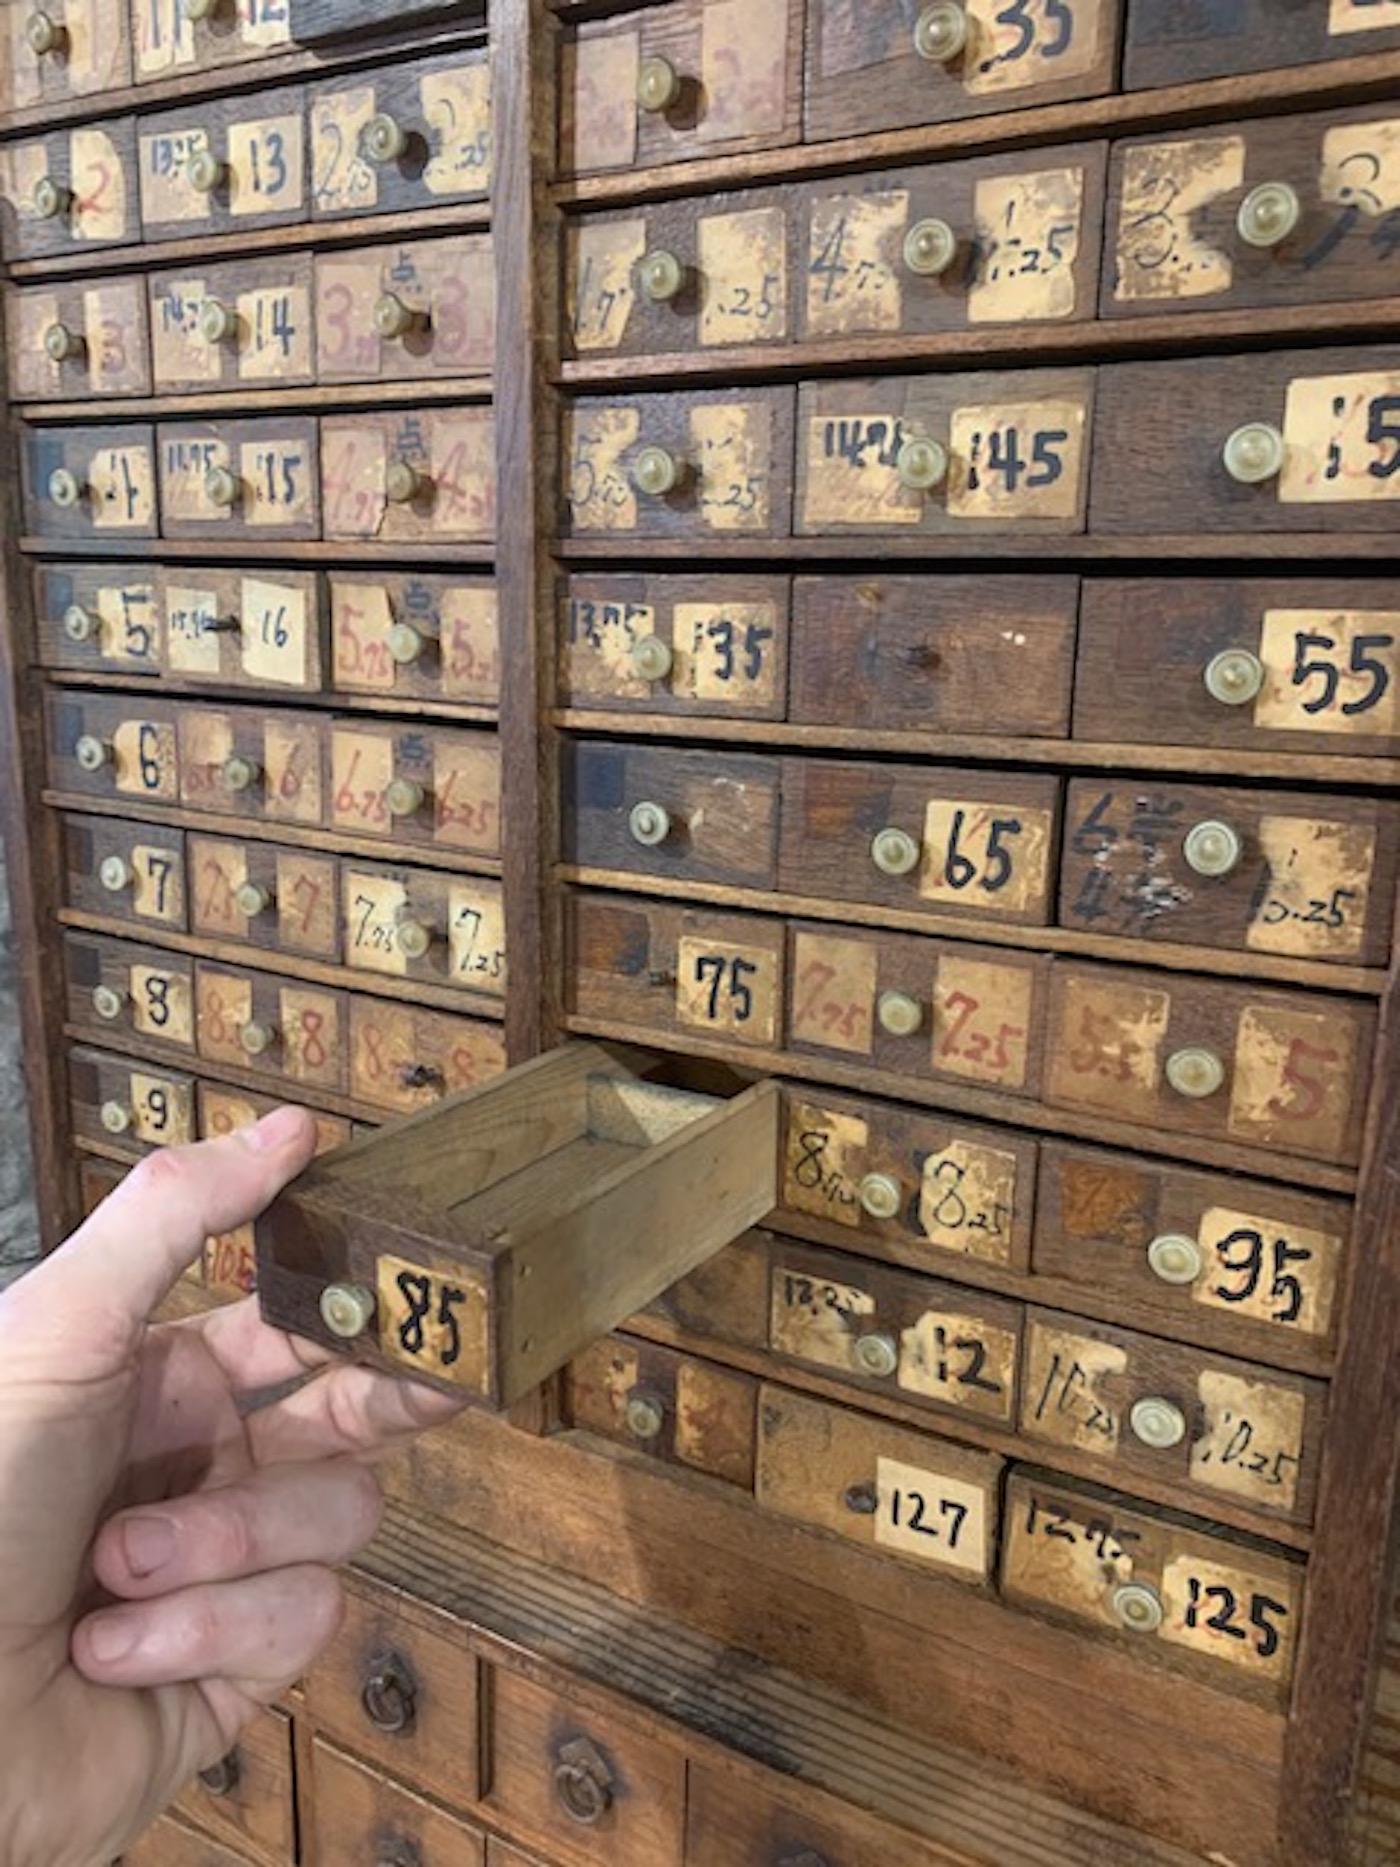 Kusuri Tansu, (Japanese Medicine Chest). Showa period, (1926-1989). This Japanese medicine chest from Shiga, Japan is completely original with old round polymer drawer pulls and numbered drawers used to identify locations of the medicinal herbs that